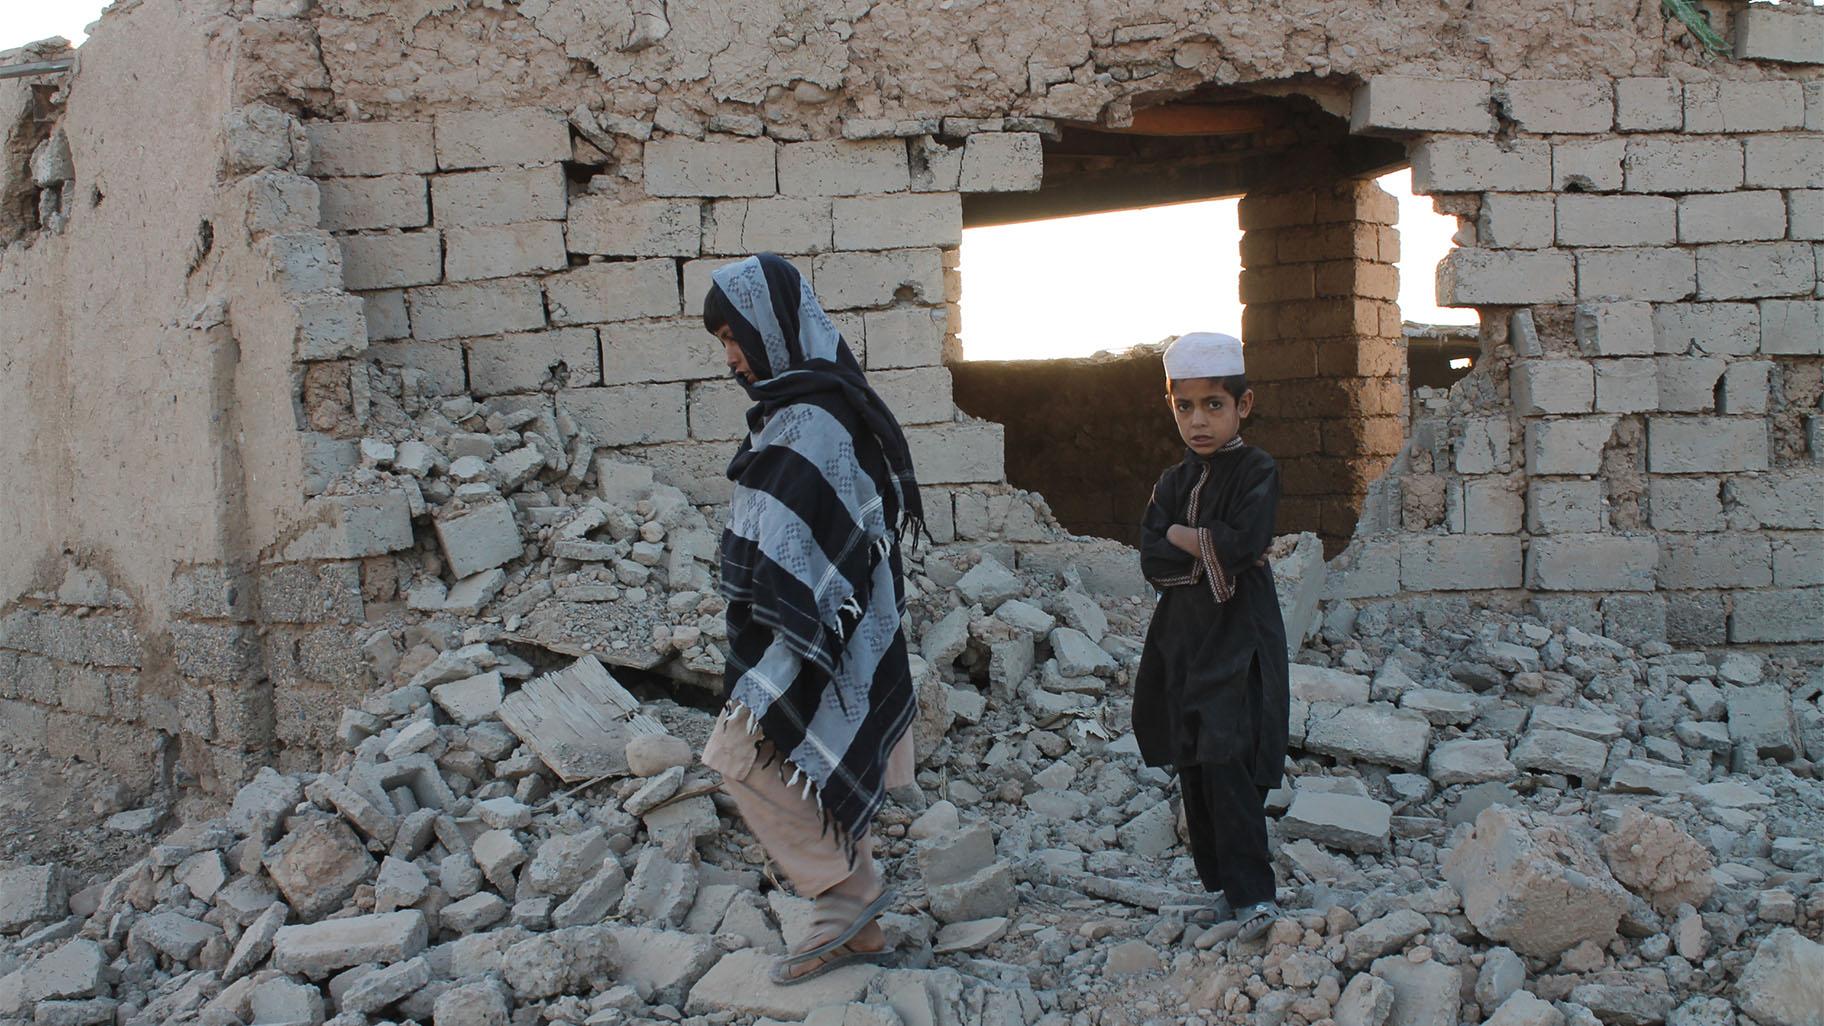 Afghan boys walk near a damaged house after airstrikes in two weeks ago during a fight between government forces and the Taliban in Lashkar Gah, Helmand province, southwestern, Afghanistan, Saturday, Aug. 21, 2021. (AP Photo / Abdul Khaliq)